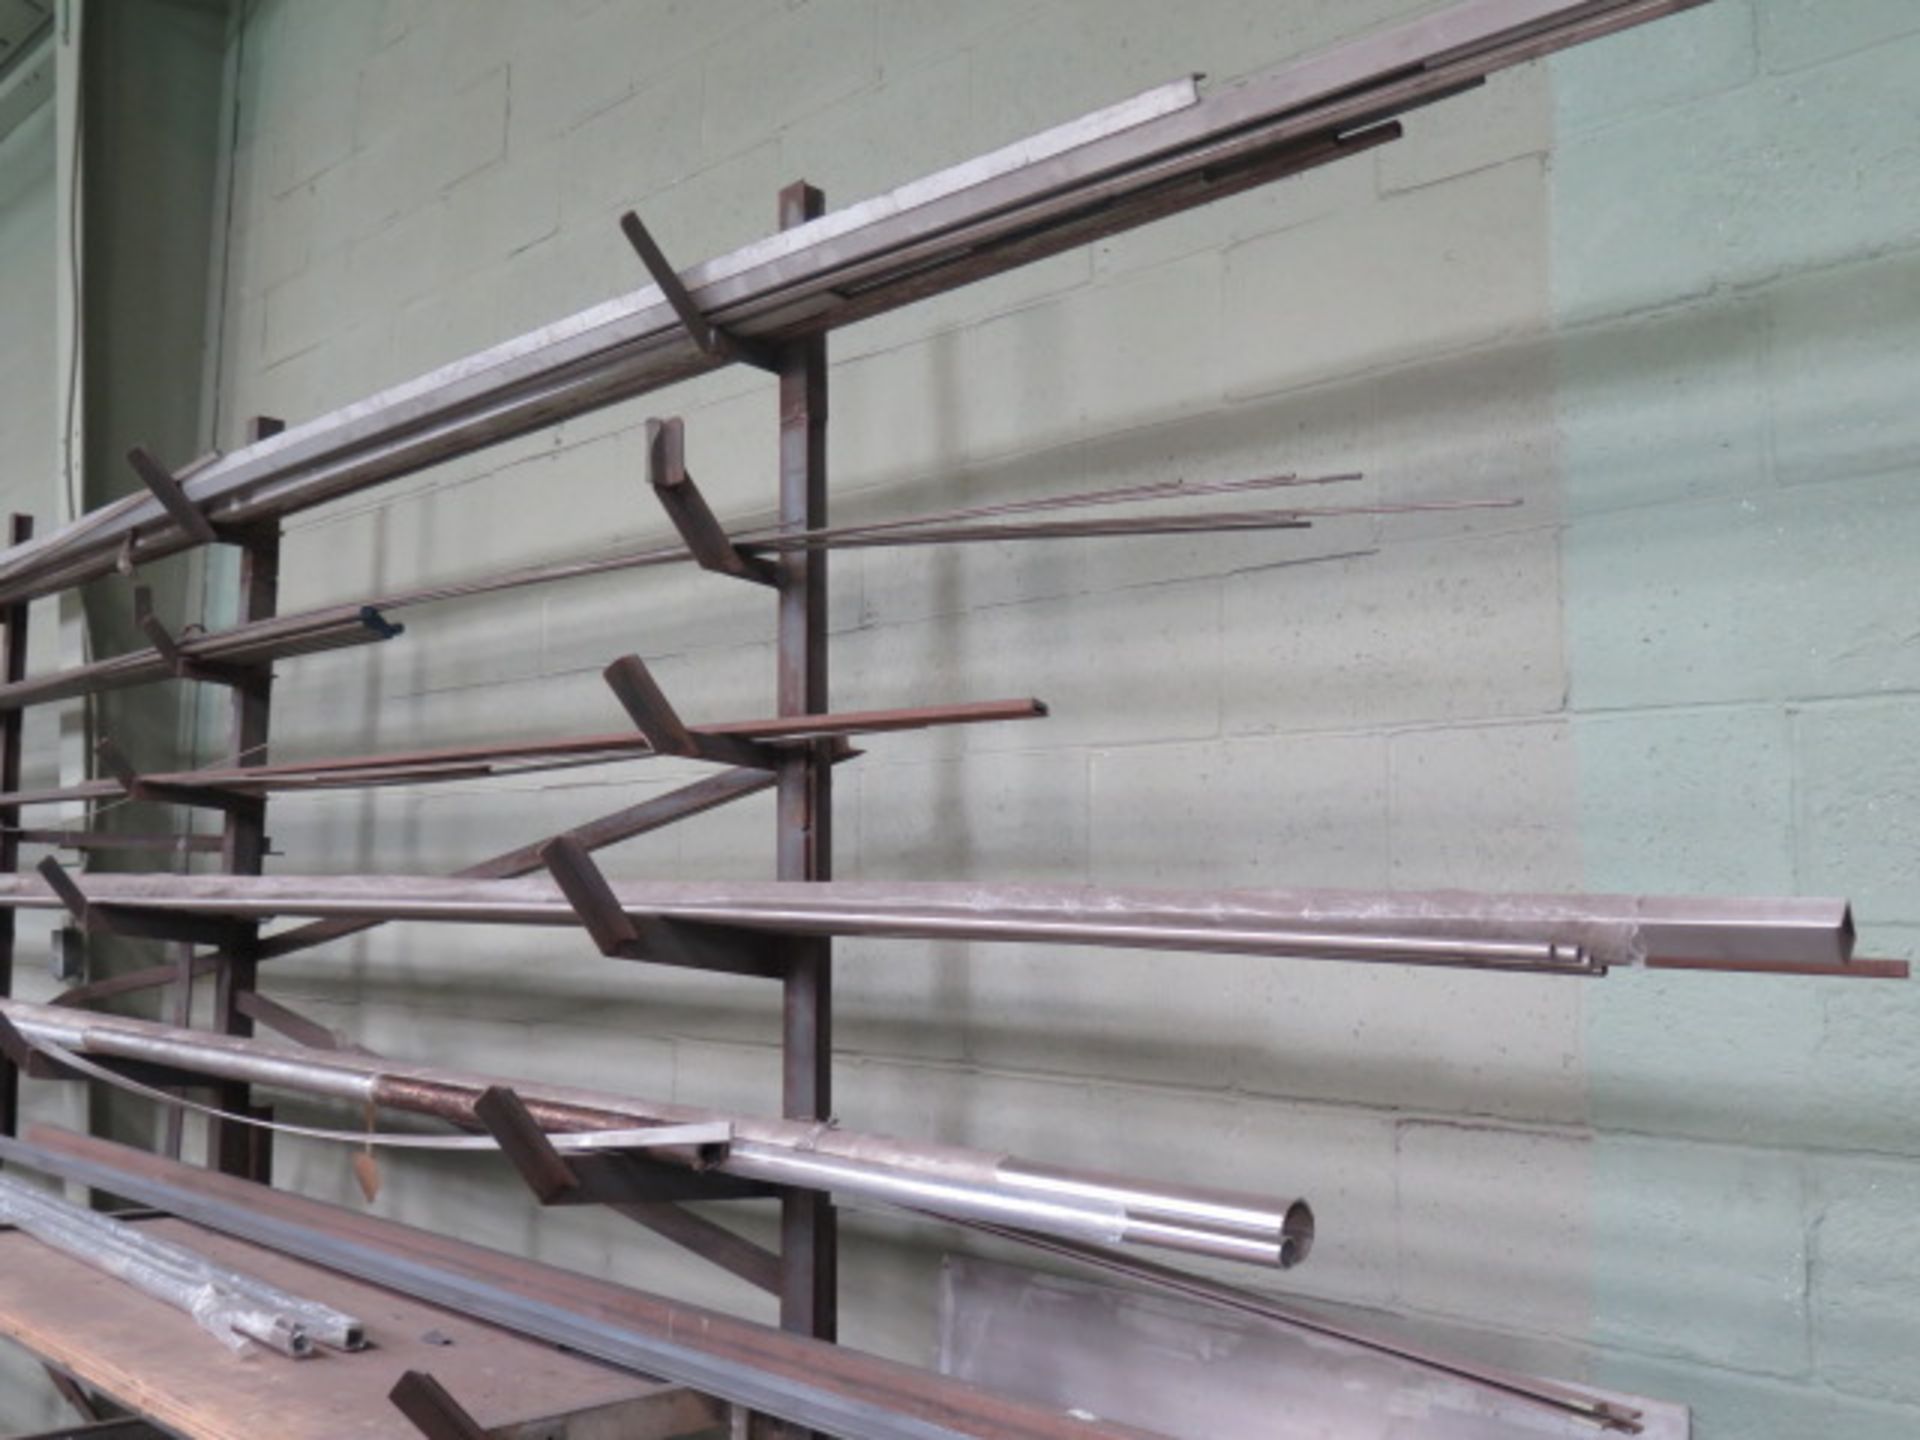 Stainless Steel and Galvanized Tube and Bar Stock - Image 2 of 5